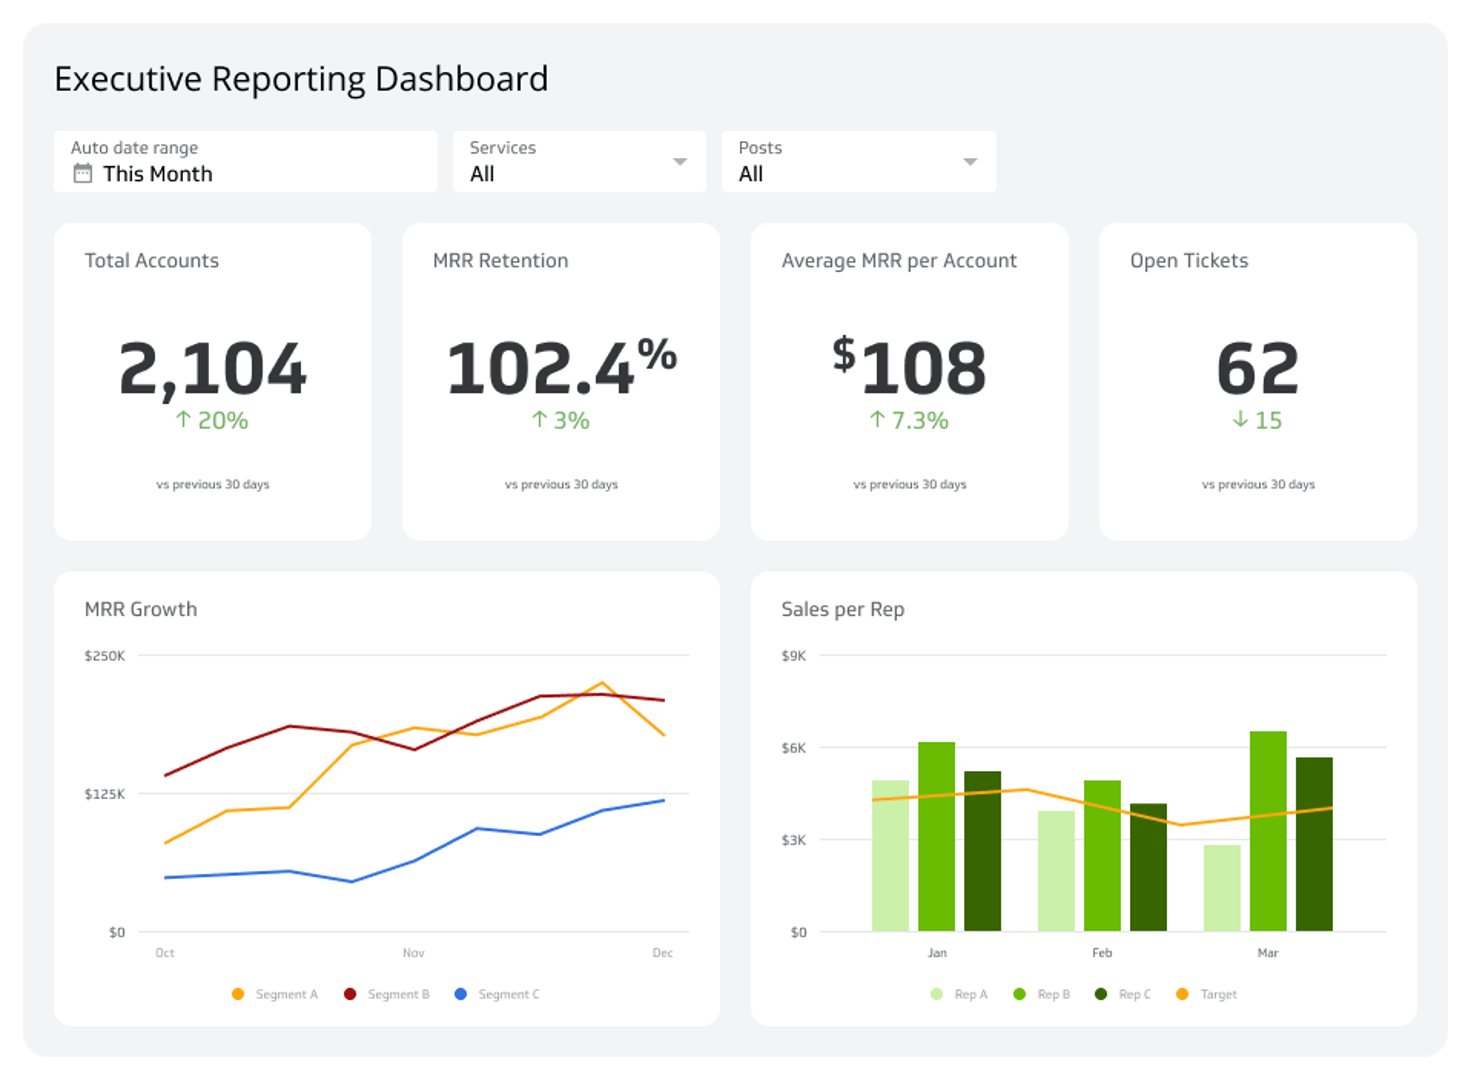 Related Dashboard Examples - Executive Reporting Dashboard